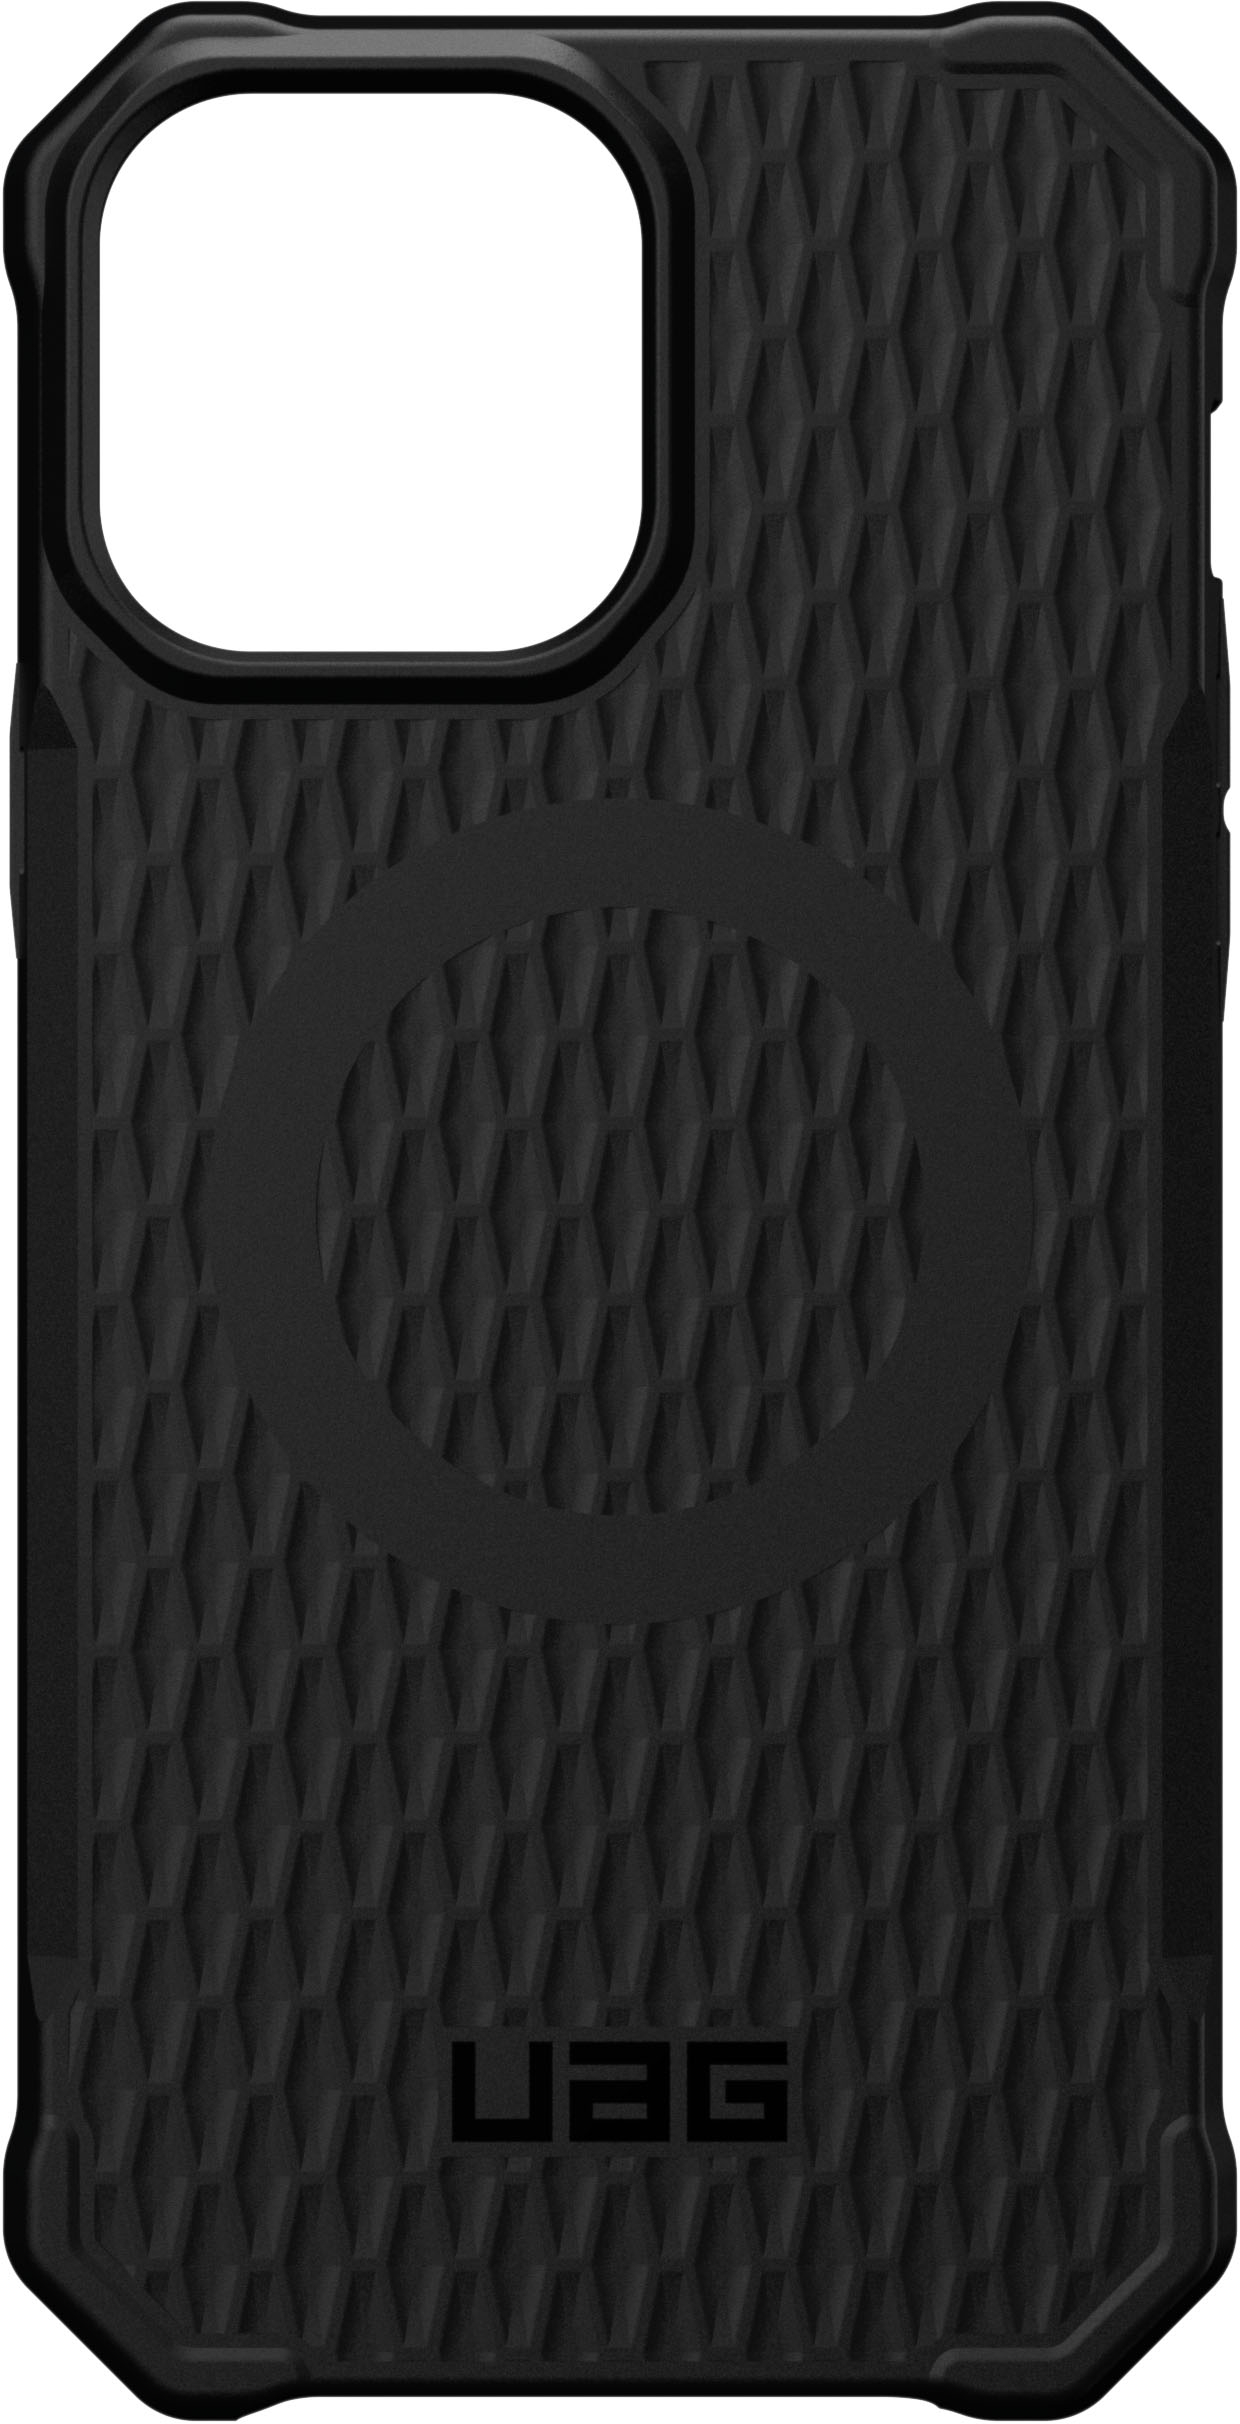 Angle View: UAG - Civilian Series Hard shell Case for iPhone 12 Pro Max - Silver